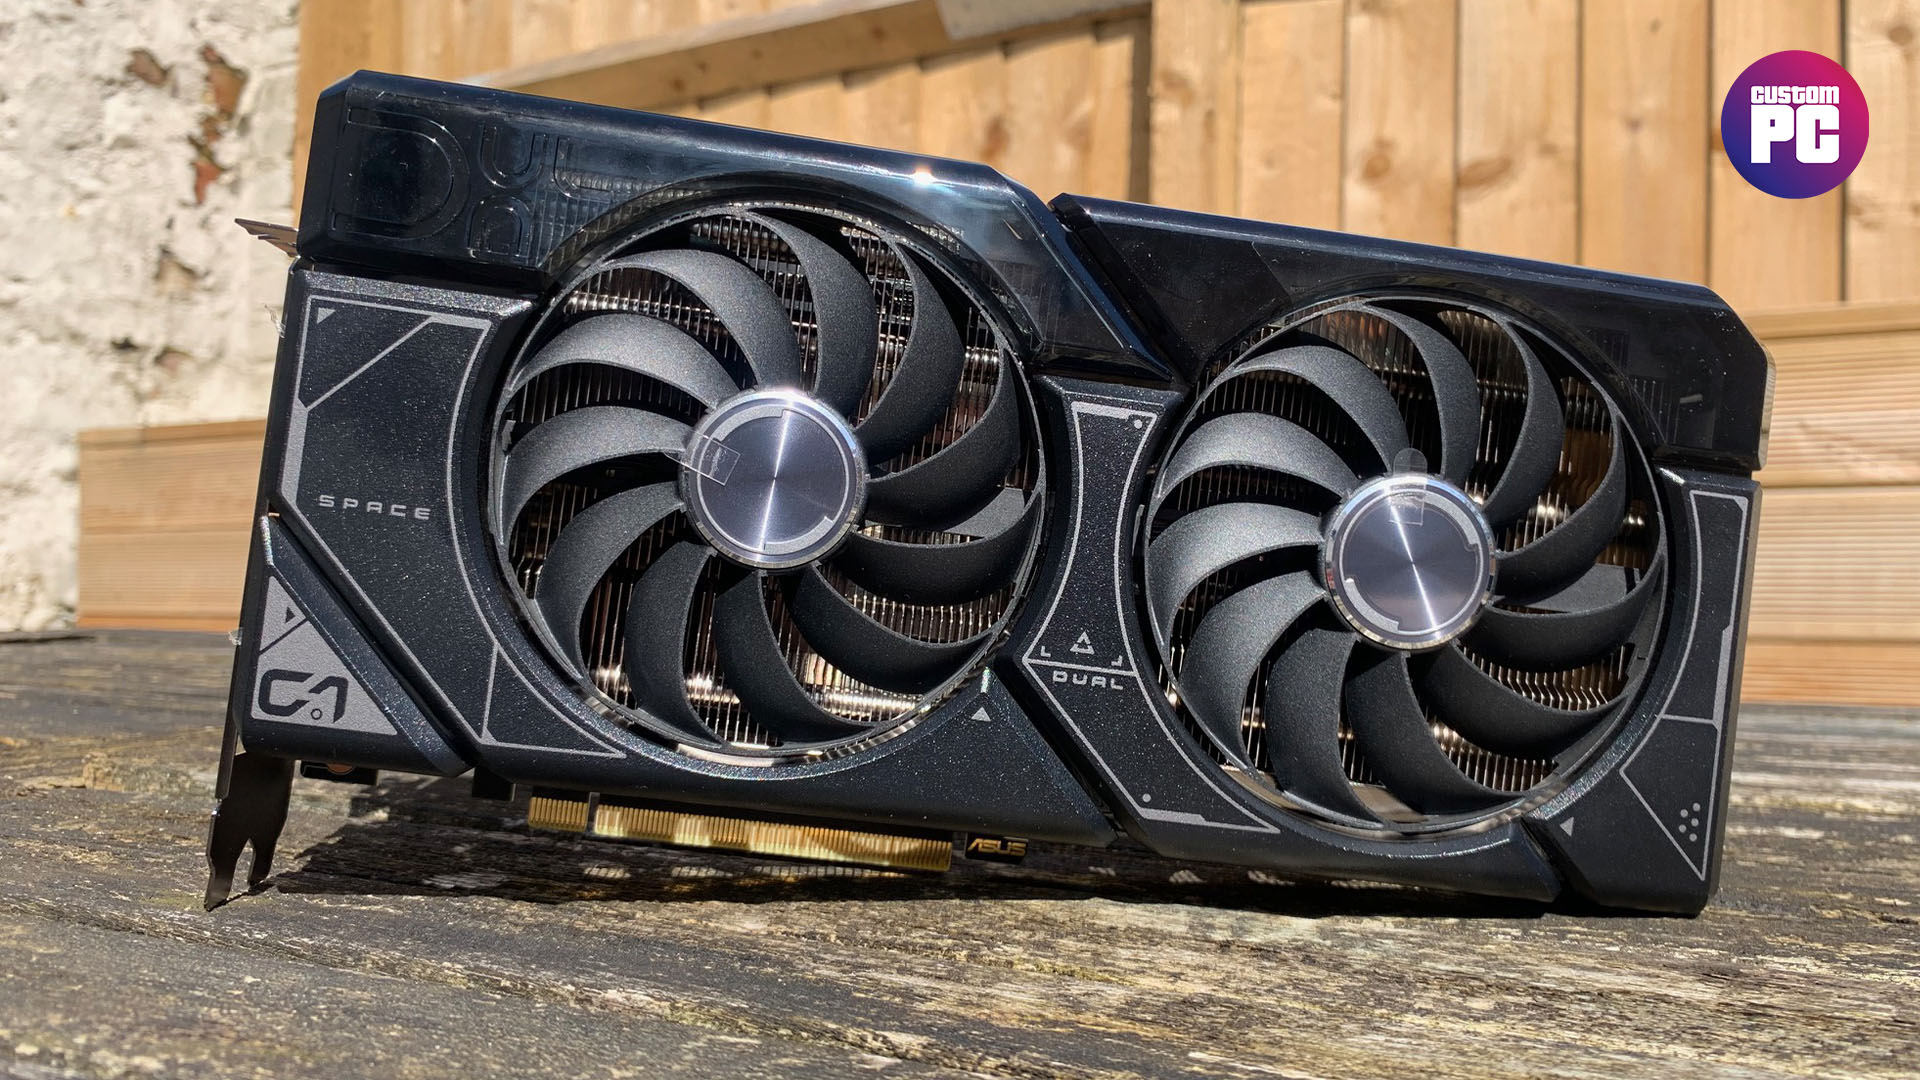 Nvidia GeForce RTX 3080 12GB Reviews, Pros and Cons